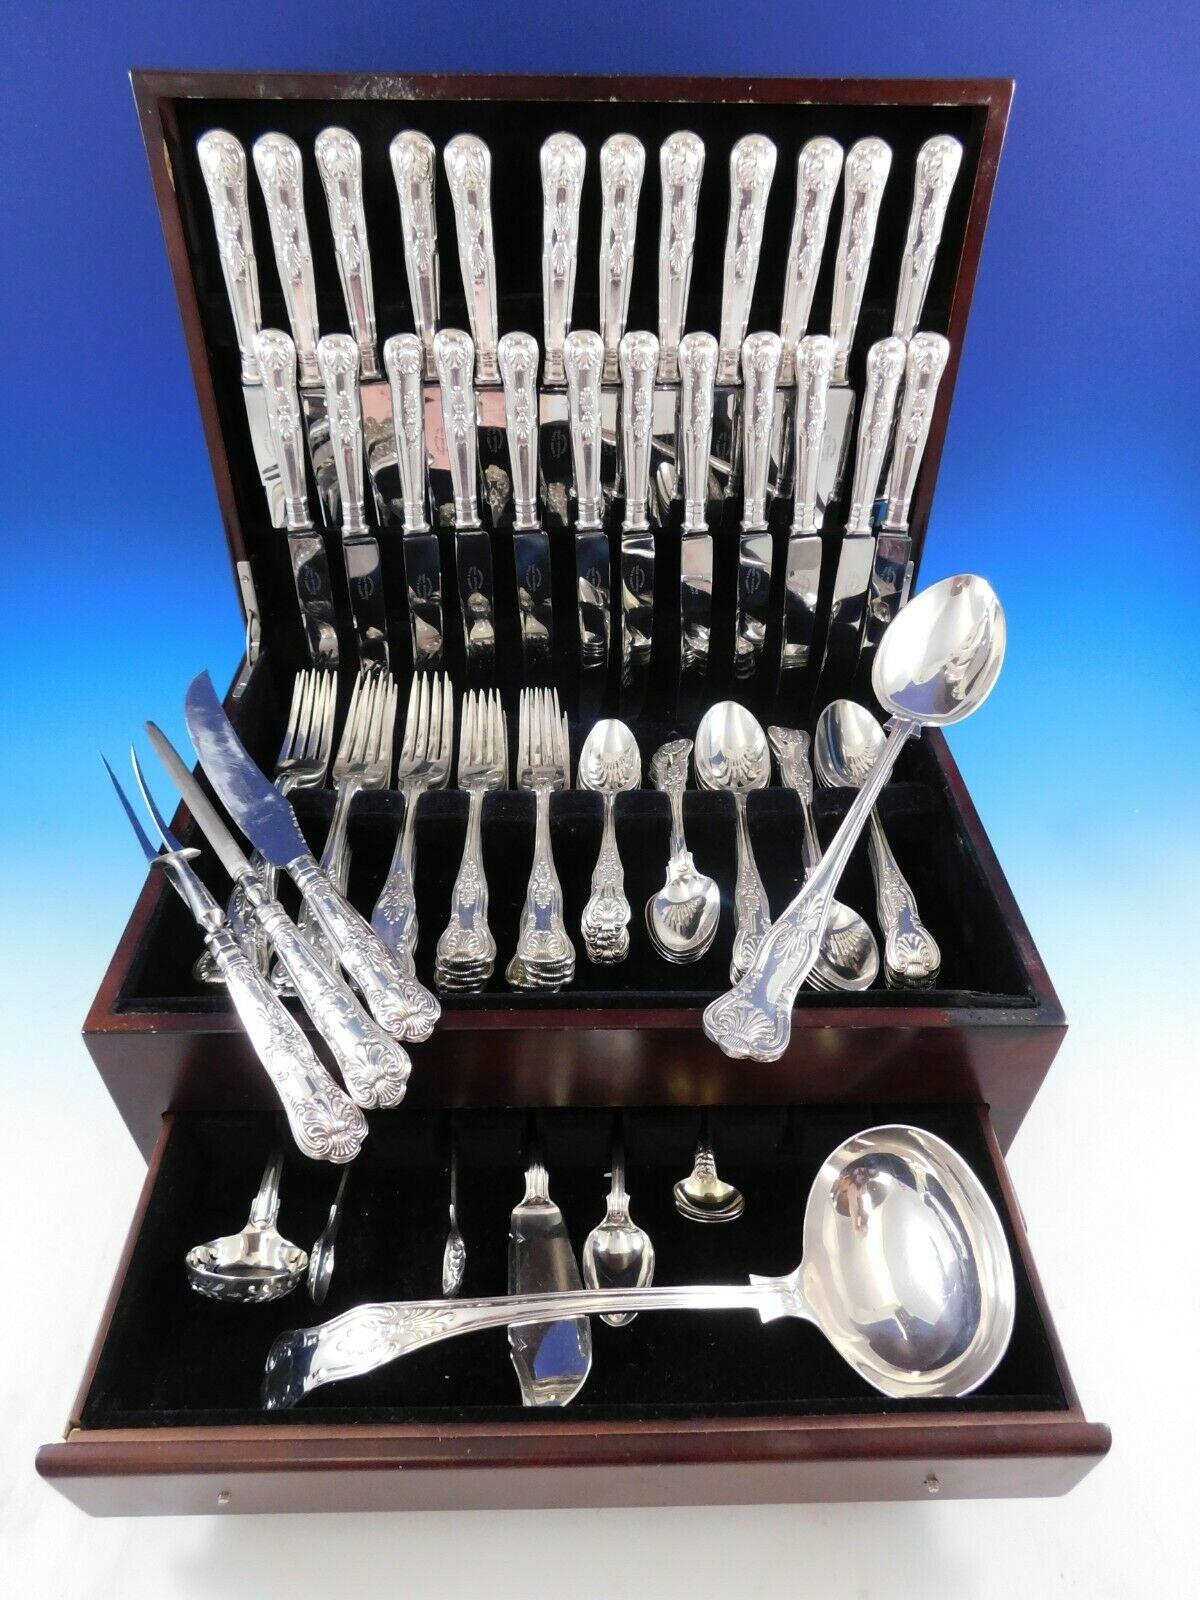 Early assembled Dinner Size Kings / Queens classic shell motif English sterling silver and silverplate (as notated) Flatware set, 82 pieces. This set includes:

12 Dinner Knives, 9 3/4